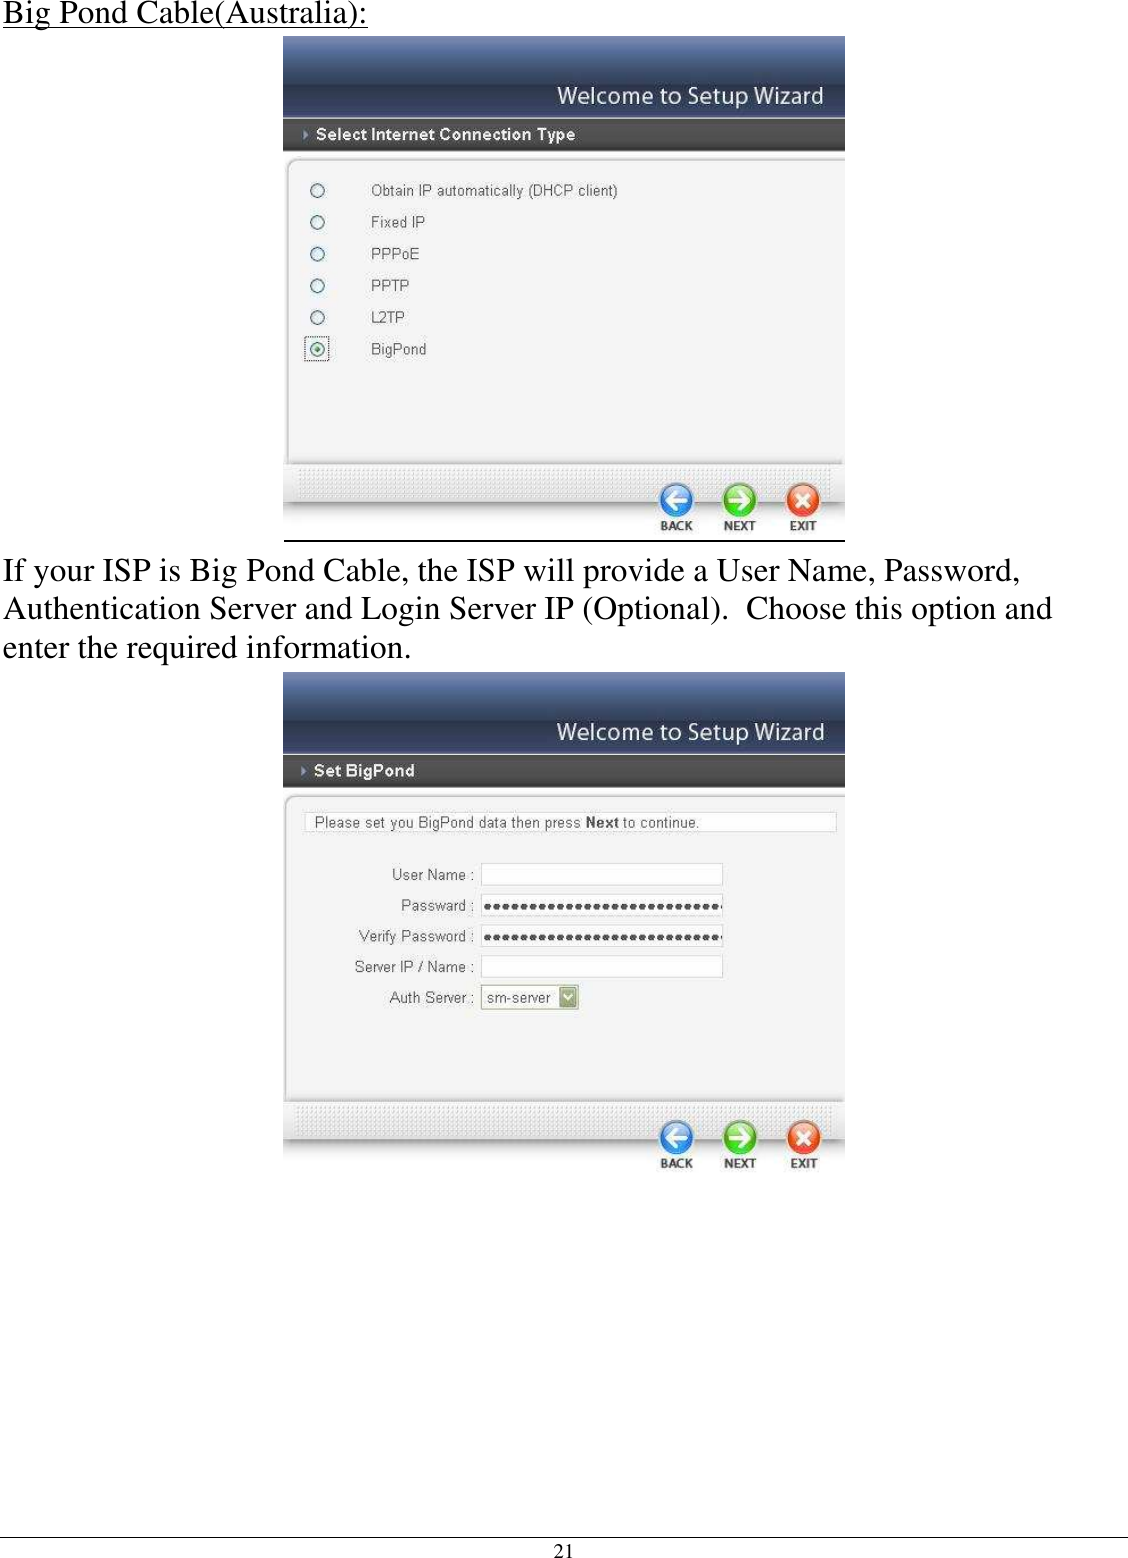 21 Big Pond Cable(Australia):  If your ISP is Big Pond Cable, the ISP will provide a User Name, Password, Authentication Server and Login Server IP (Optional).  Choose this option and enter the required information.  